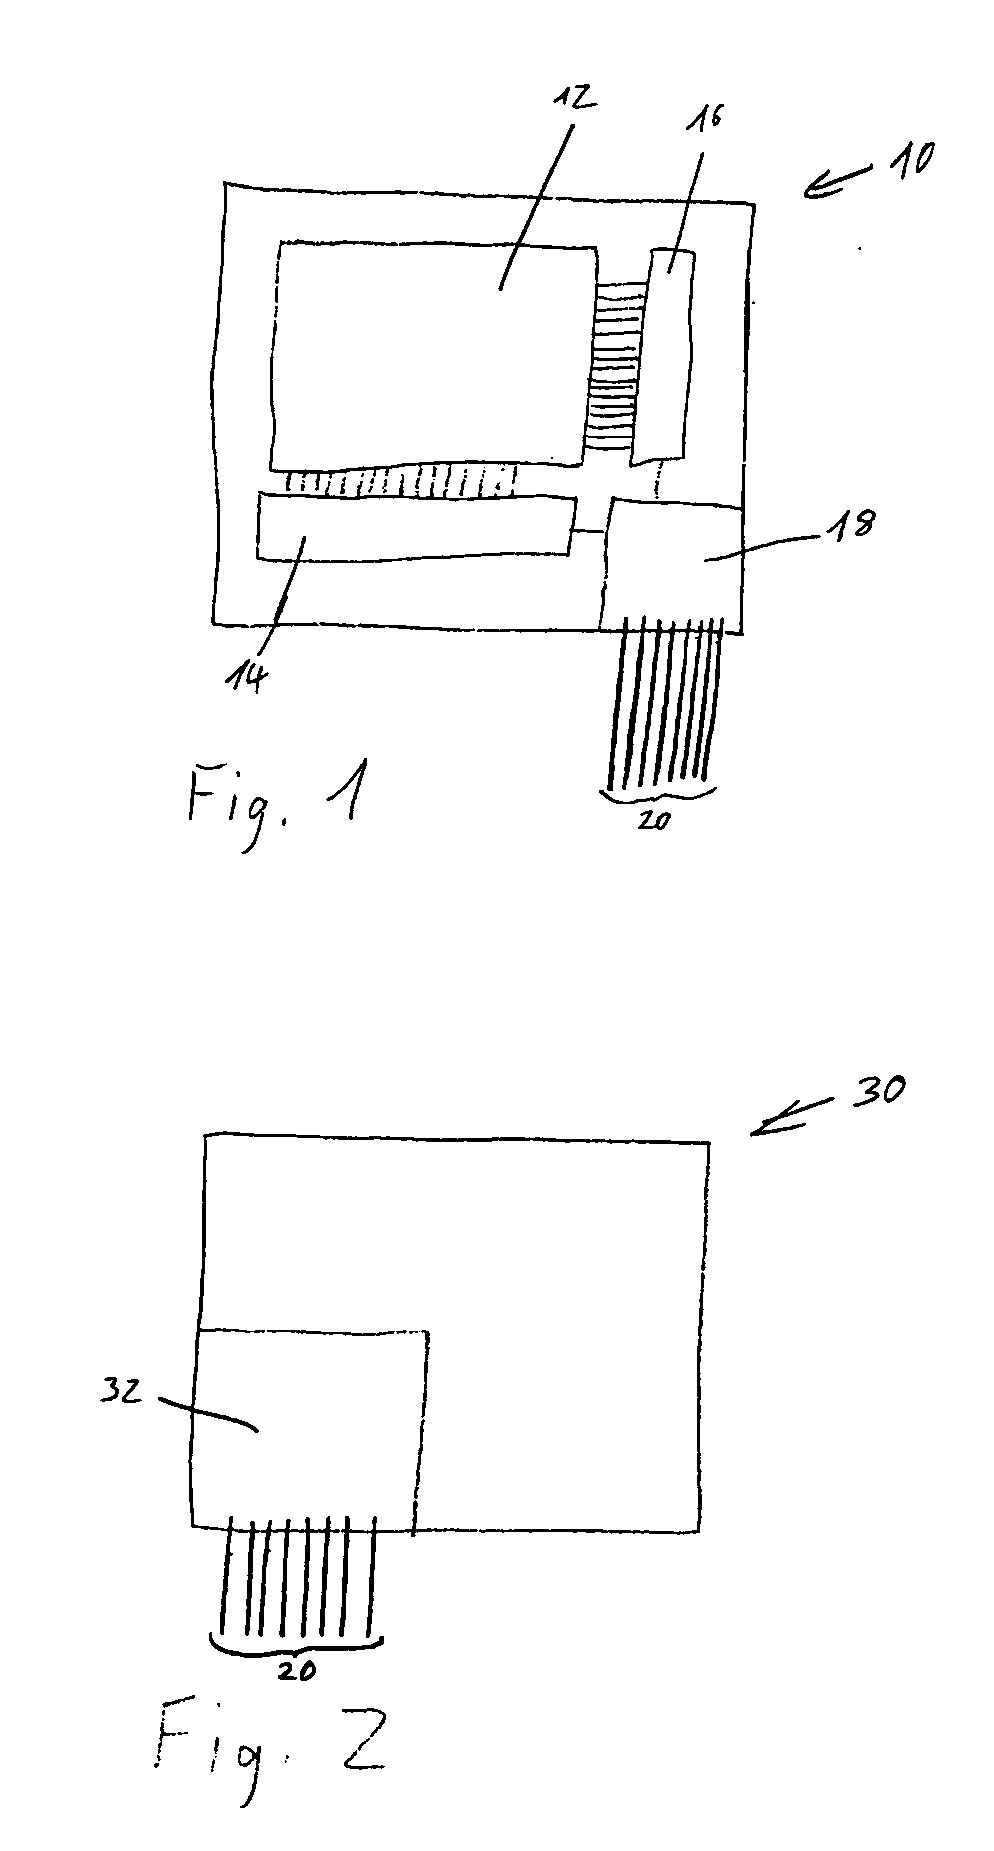 Method of transferring signals between a memory device and a memory controller